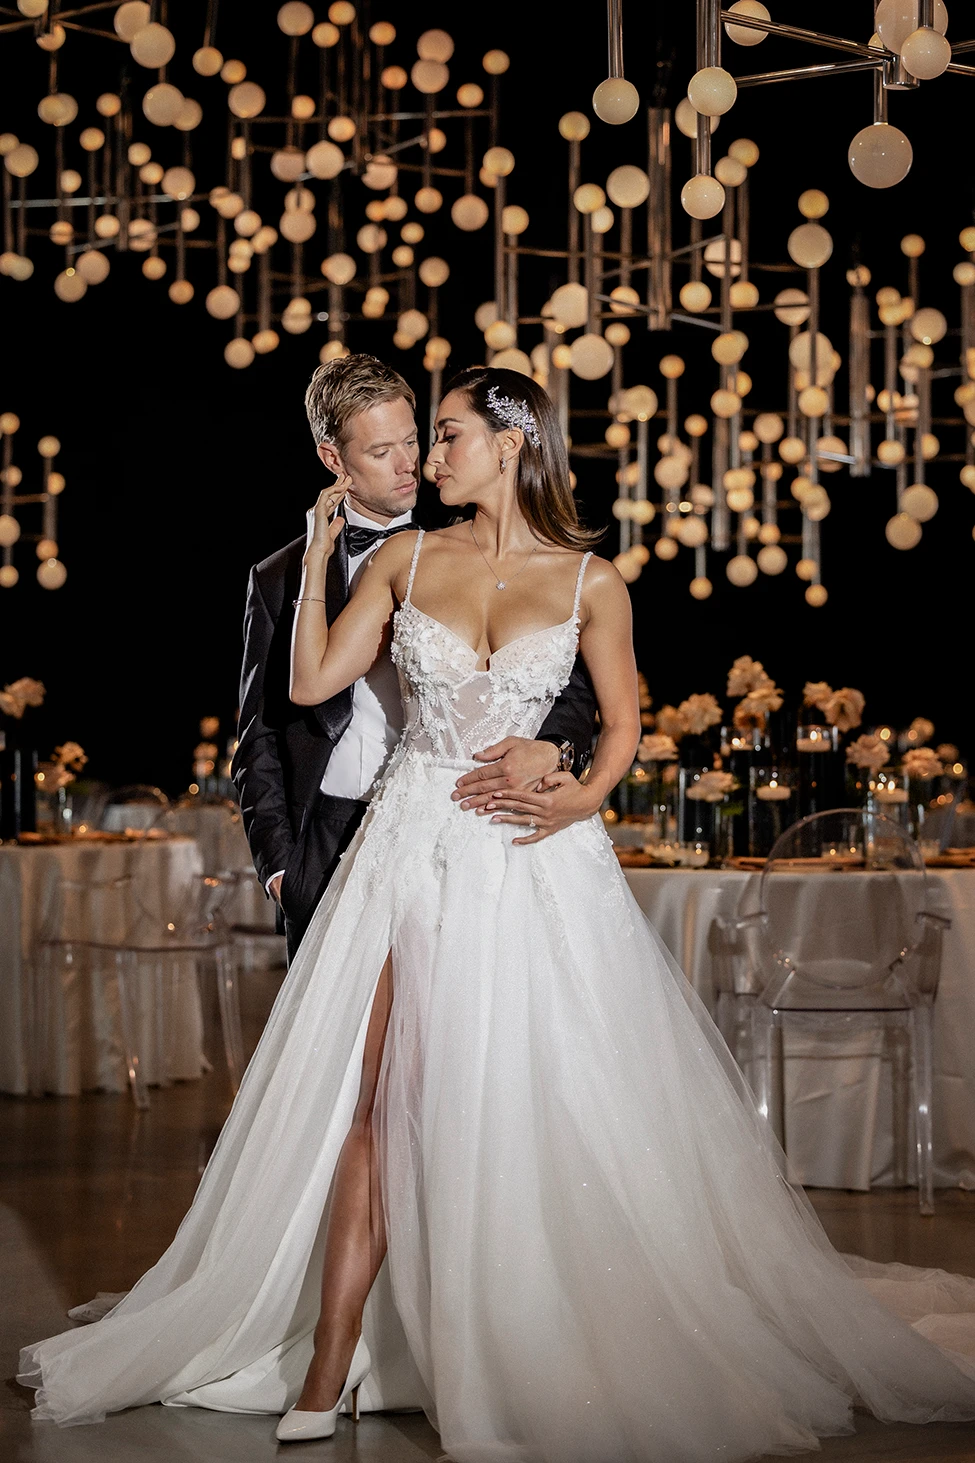 Lindsey Morgan and her fiance, Shaun Sipos, during their pre-wedding photoshoot